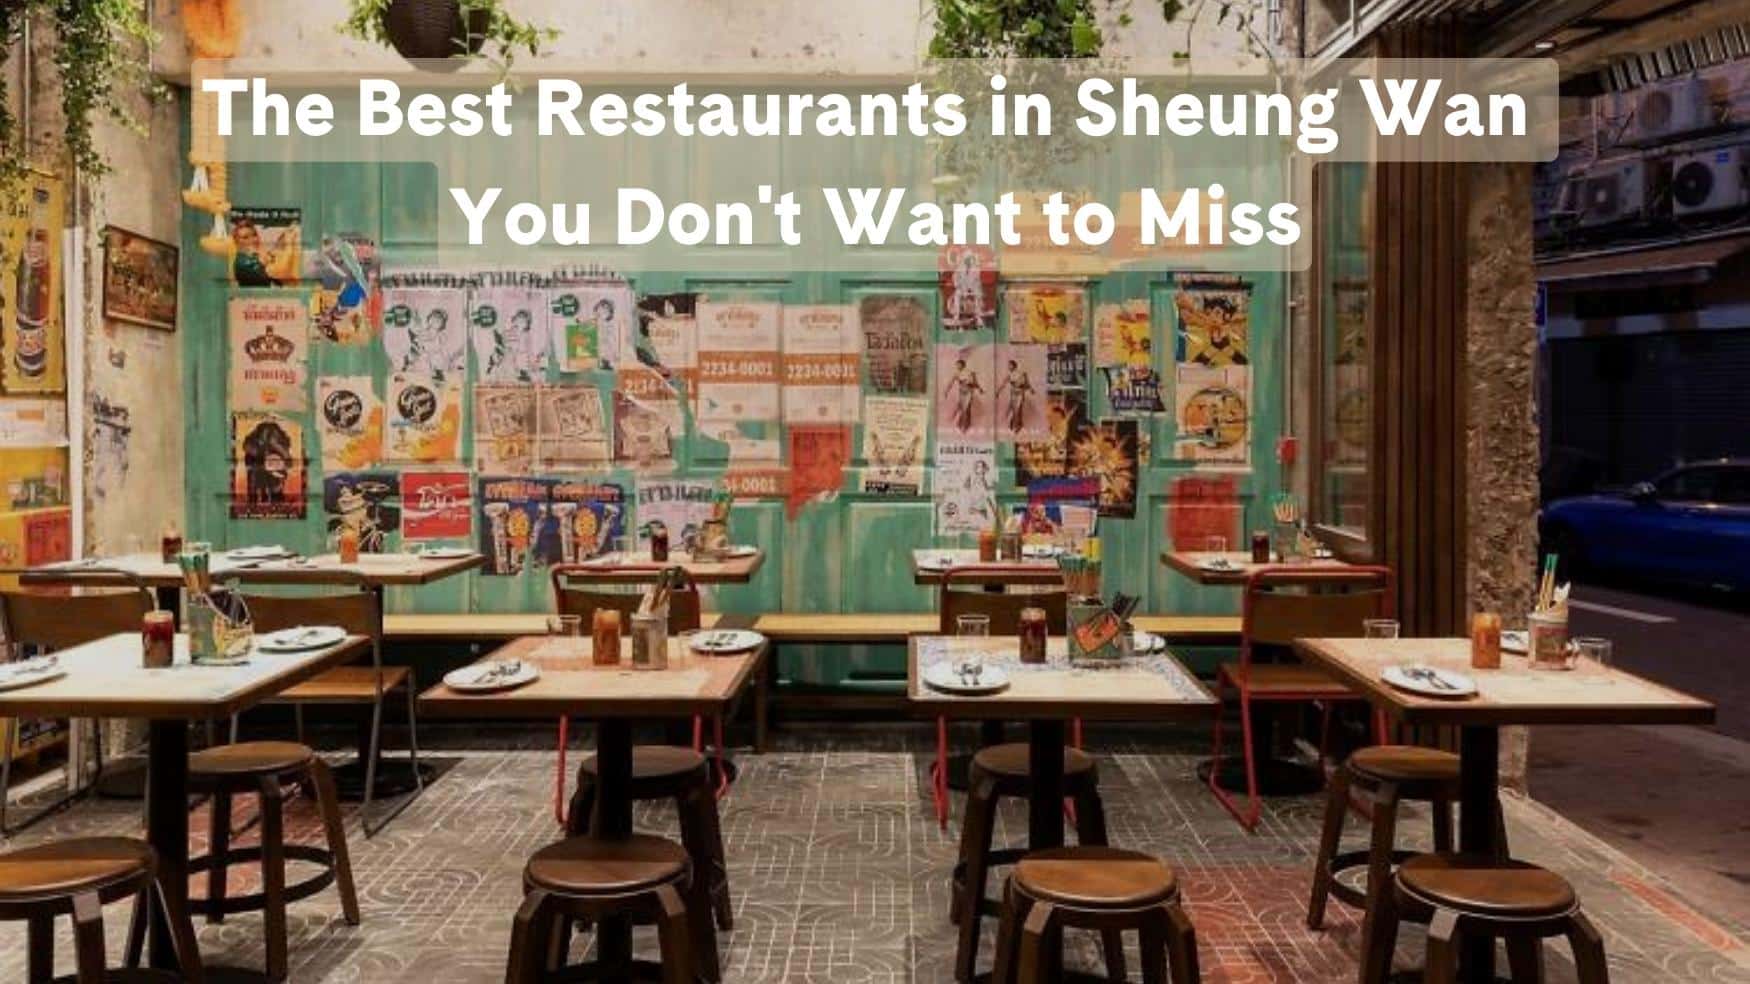 Best Restaurants in Sheung Wan You Don't Want to Miss